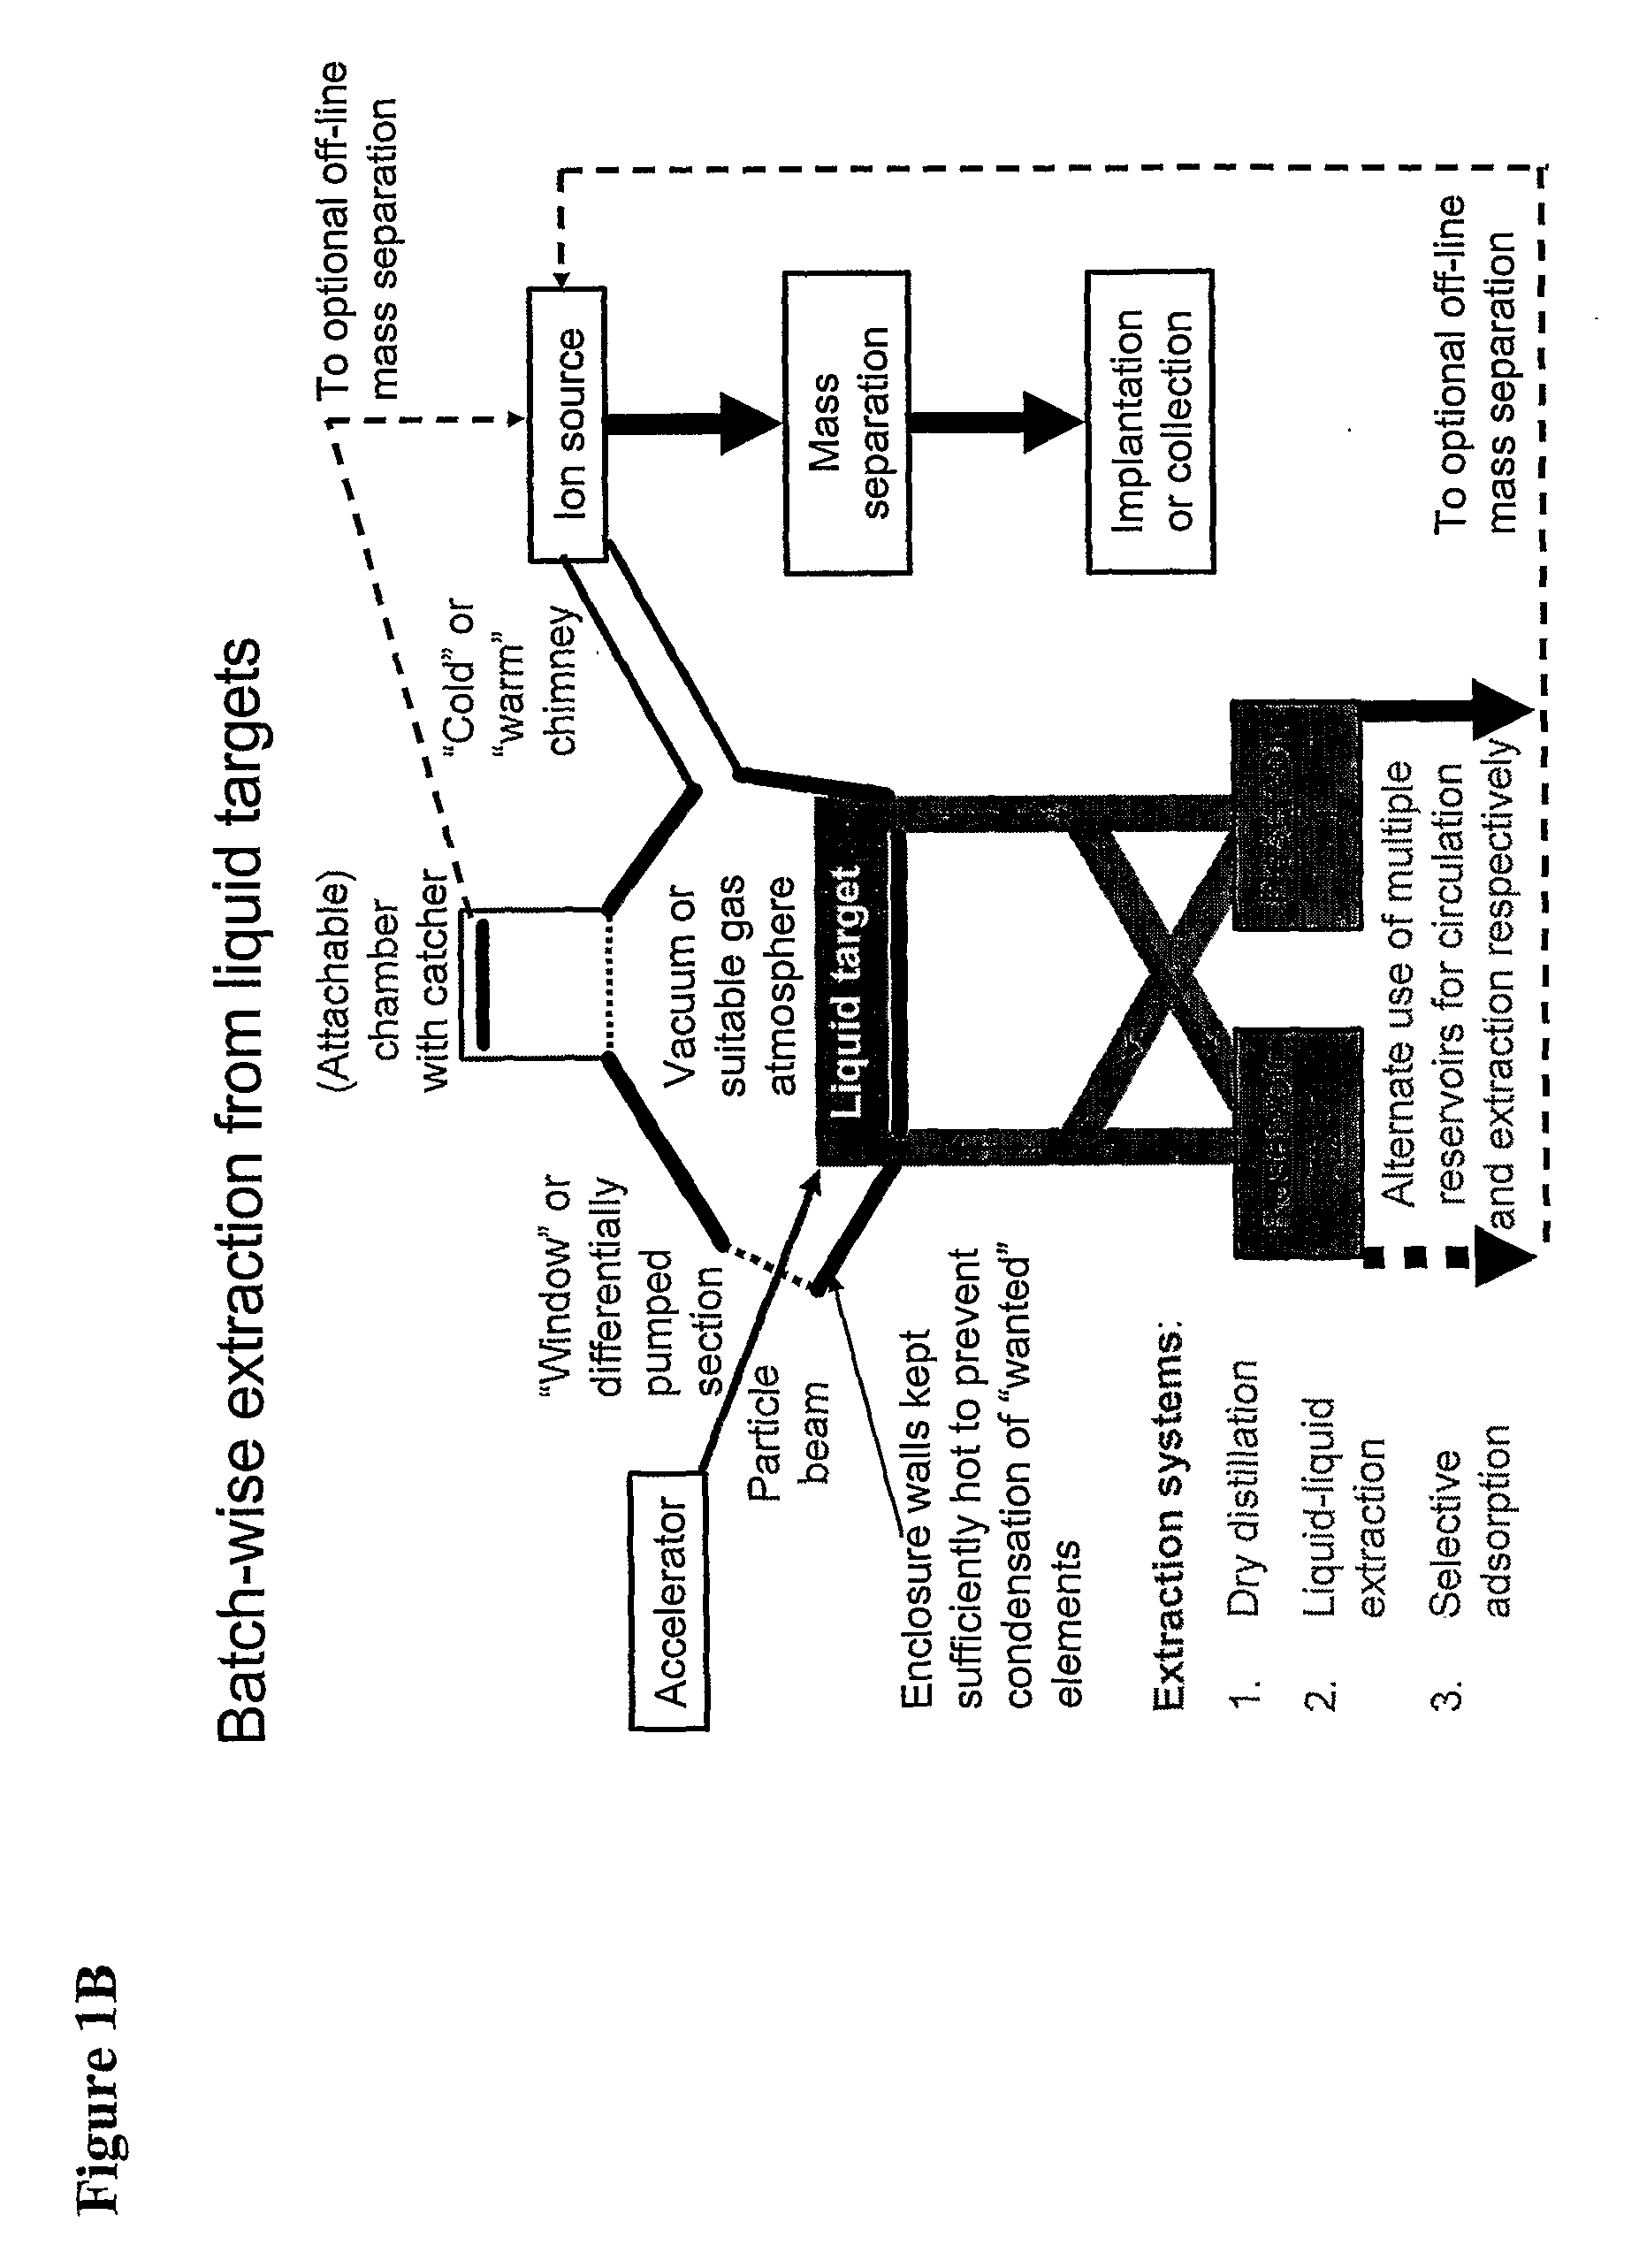 Method for Production of Radioisotope Preparations and Their Use in Life Science, Research, Medical Application and Industry